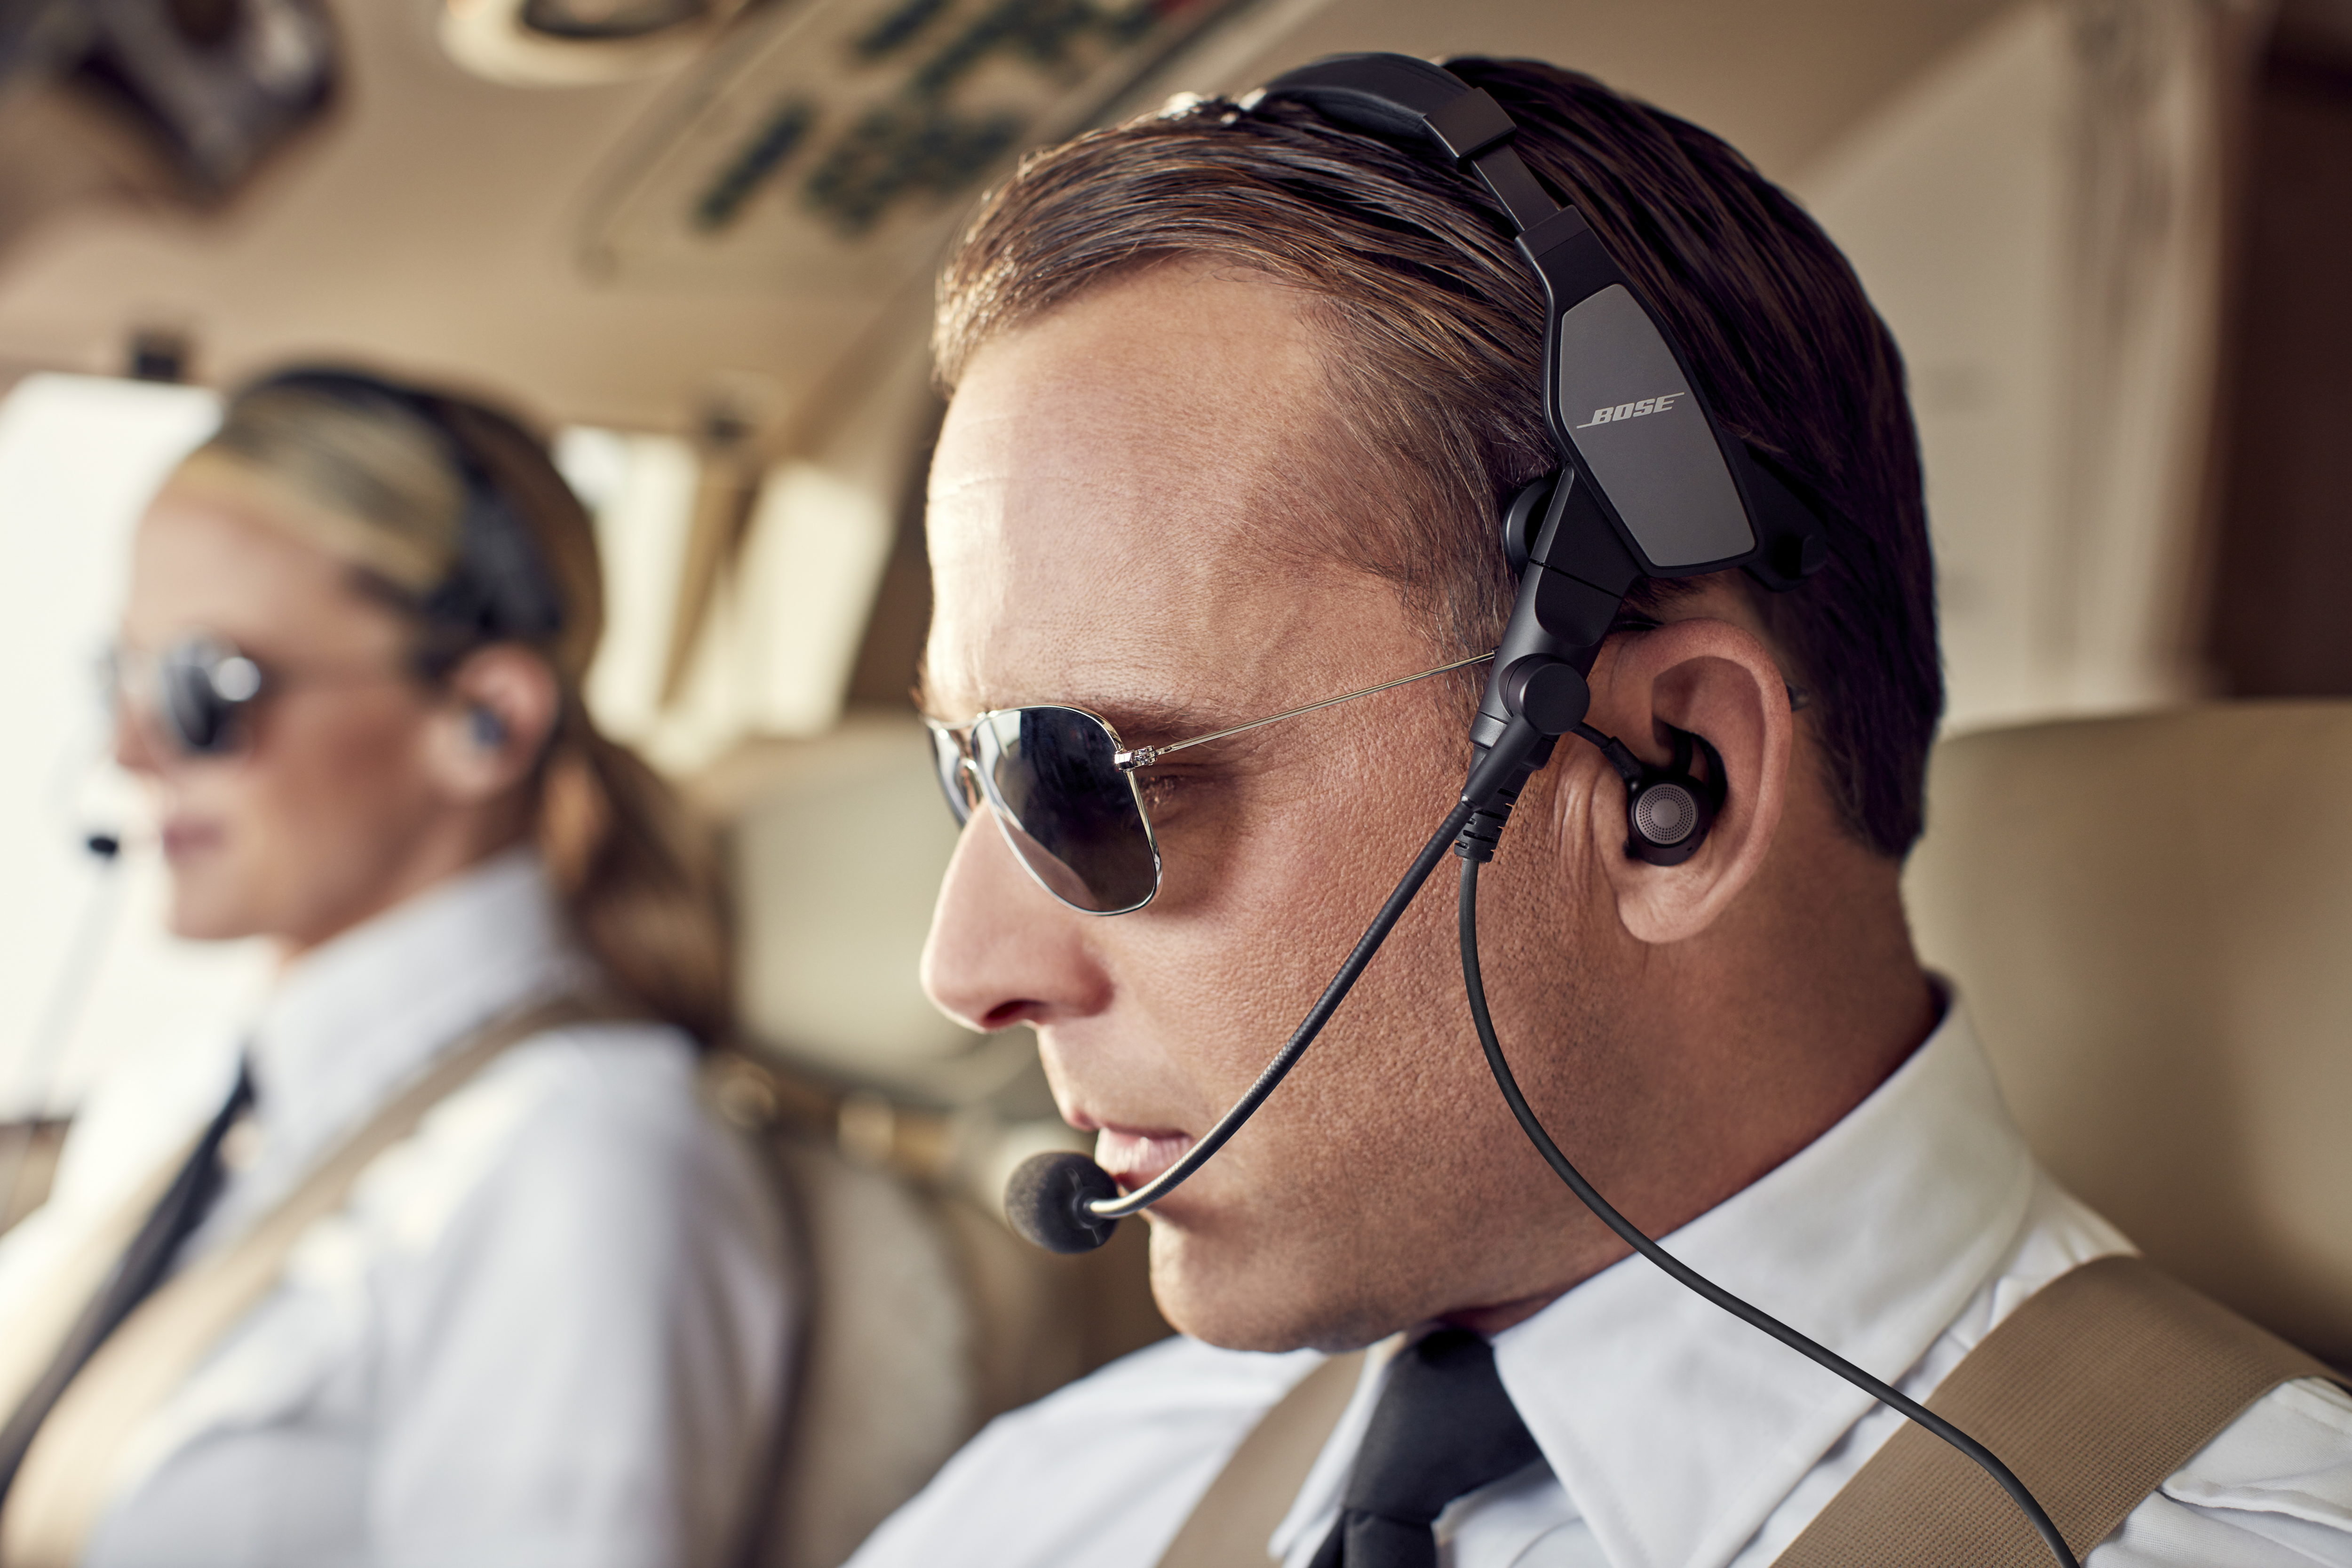 Bose delivers improvements with ProFlight Series 2 aviation